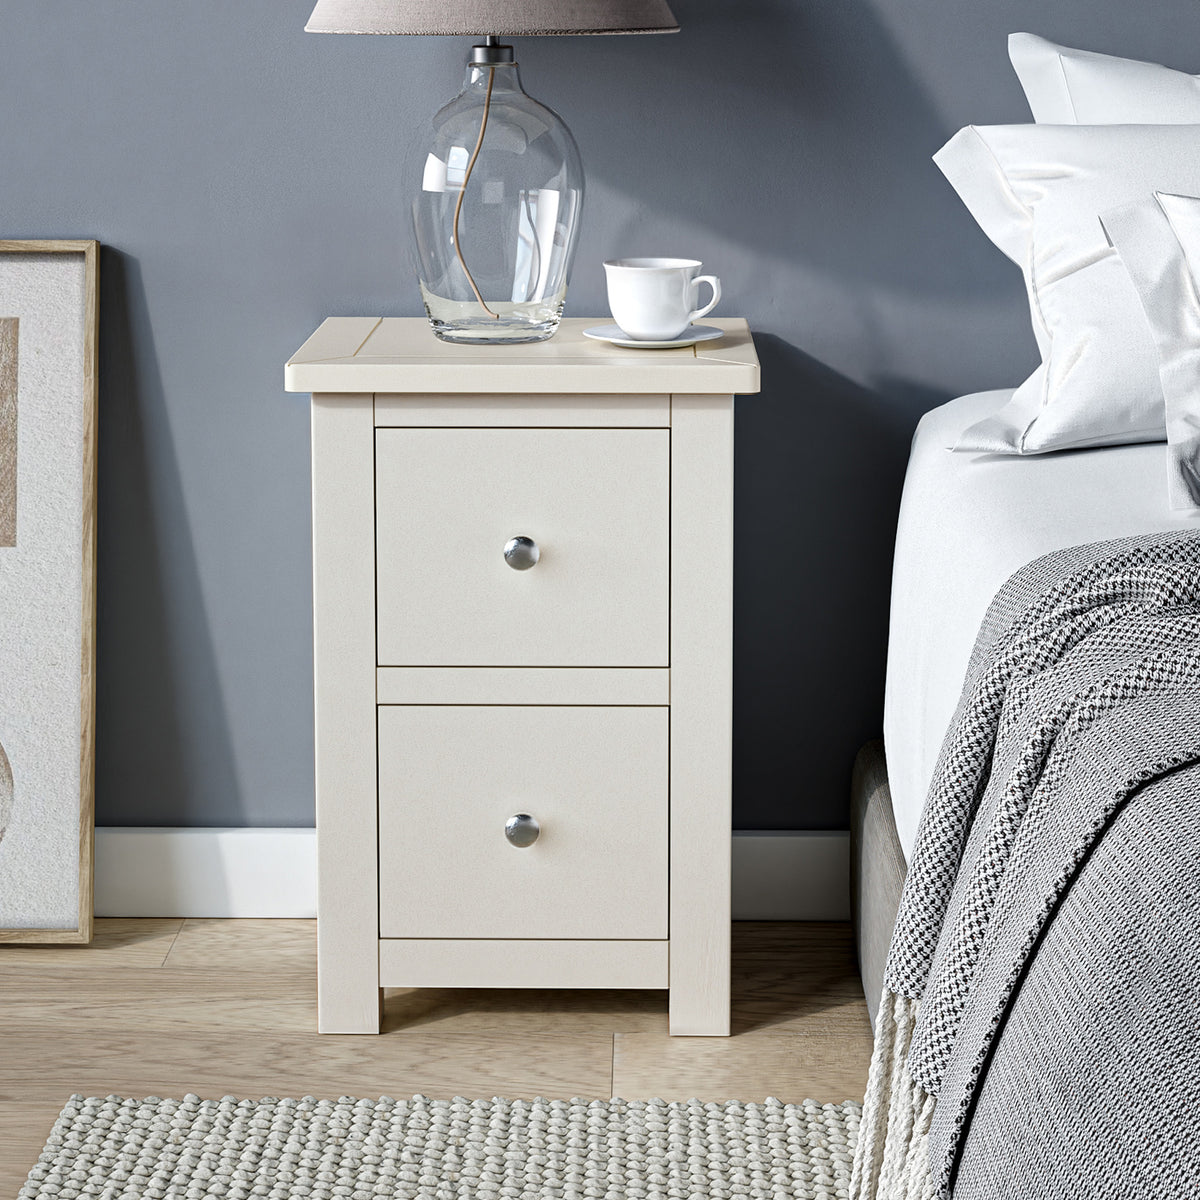 Duchy Linen Cream 2 Drawer Bedside Table for bedroom